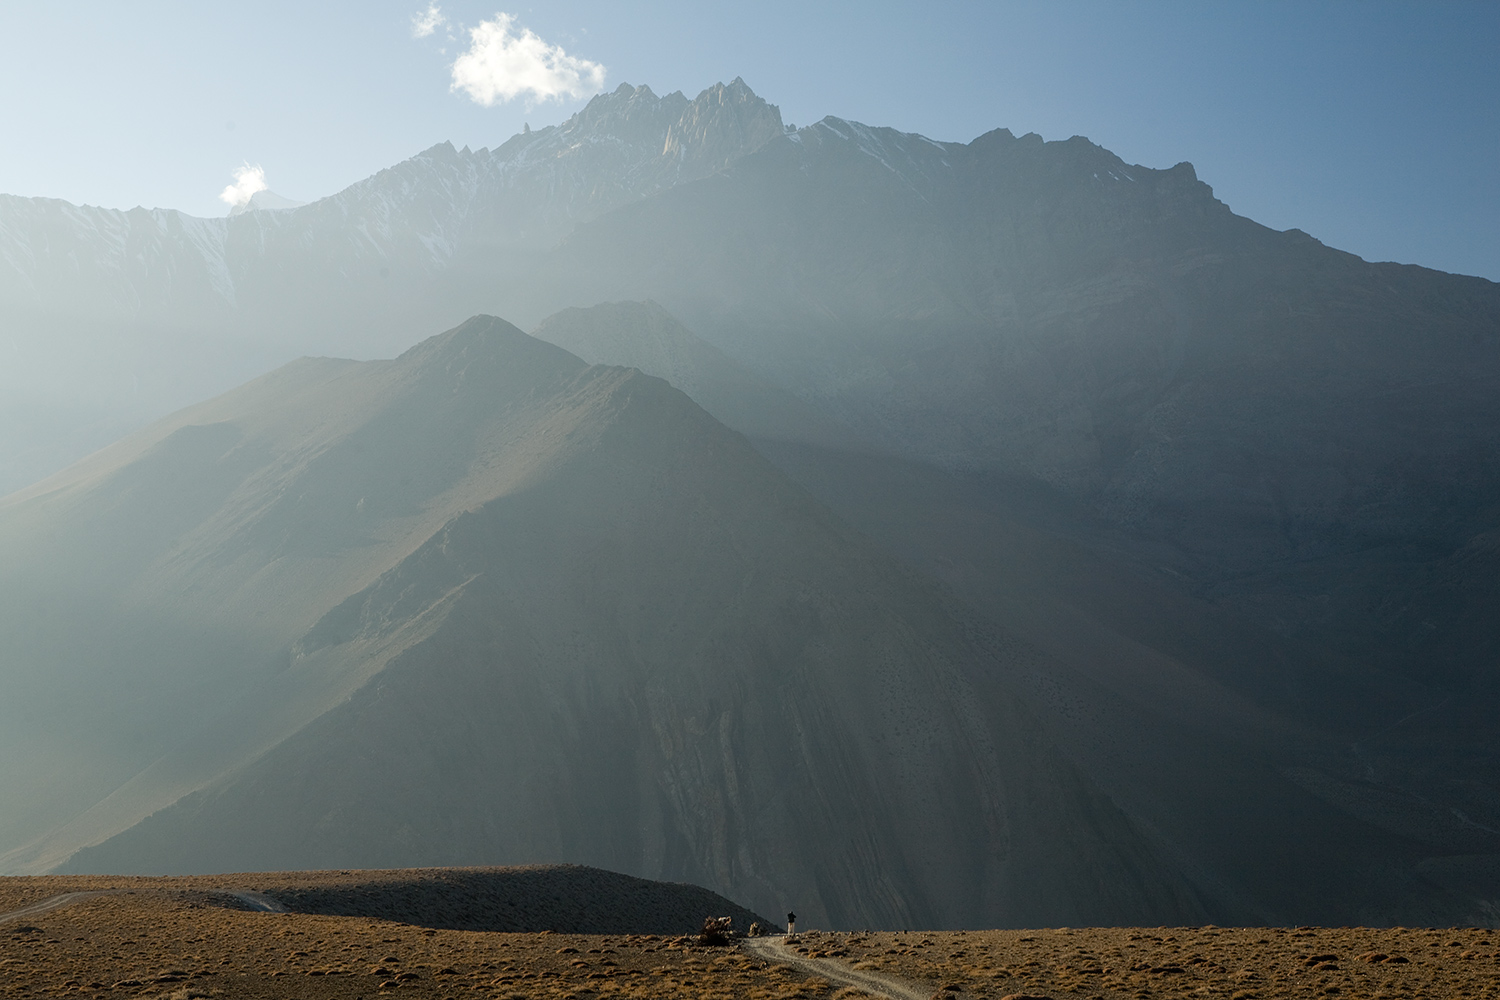  Just before the sun sets, and the wind howls through the barren canyon, a trekker stands above the town of Kagbeni. 